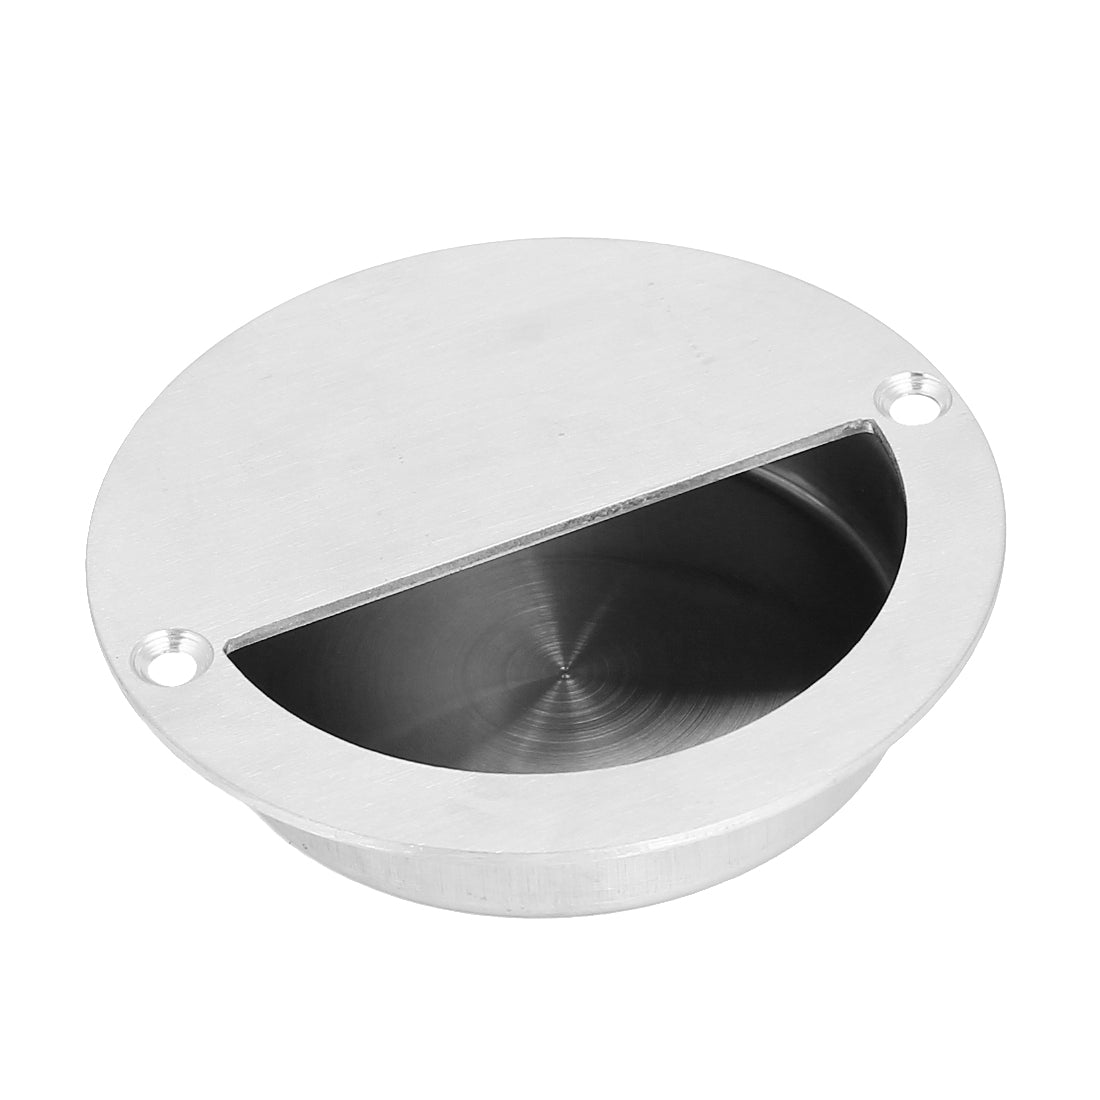 uxcell Uxcell Sliding Door Drawer Stainless Steel 90mm Round Recessed Flush Pull Handle